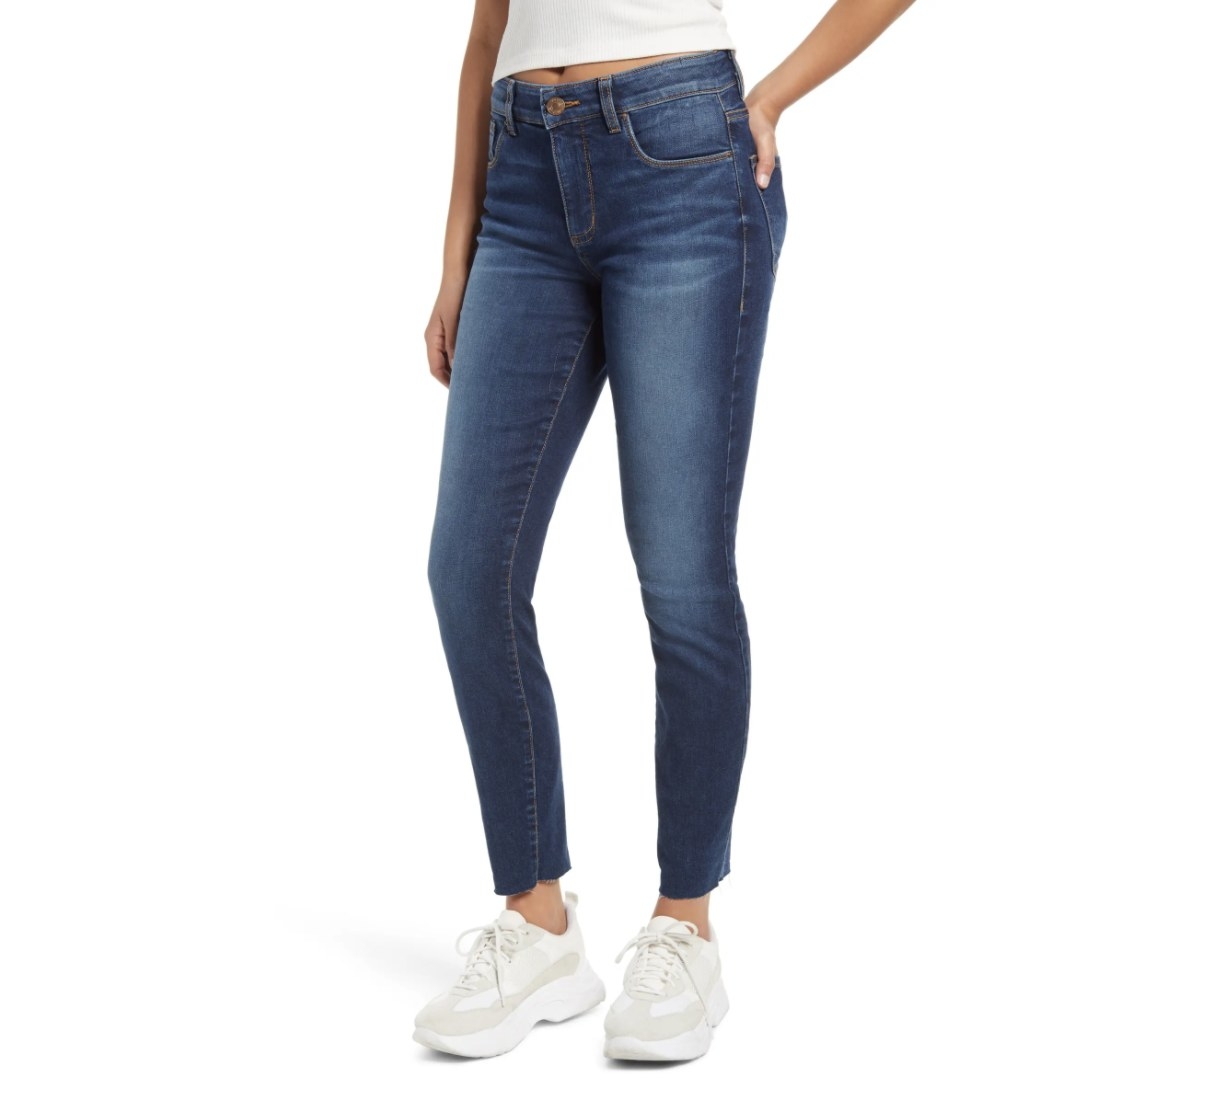 Model is wearing denim blue jeans and white sneakers